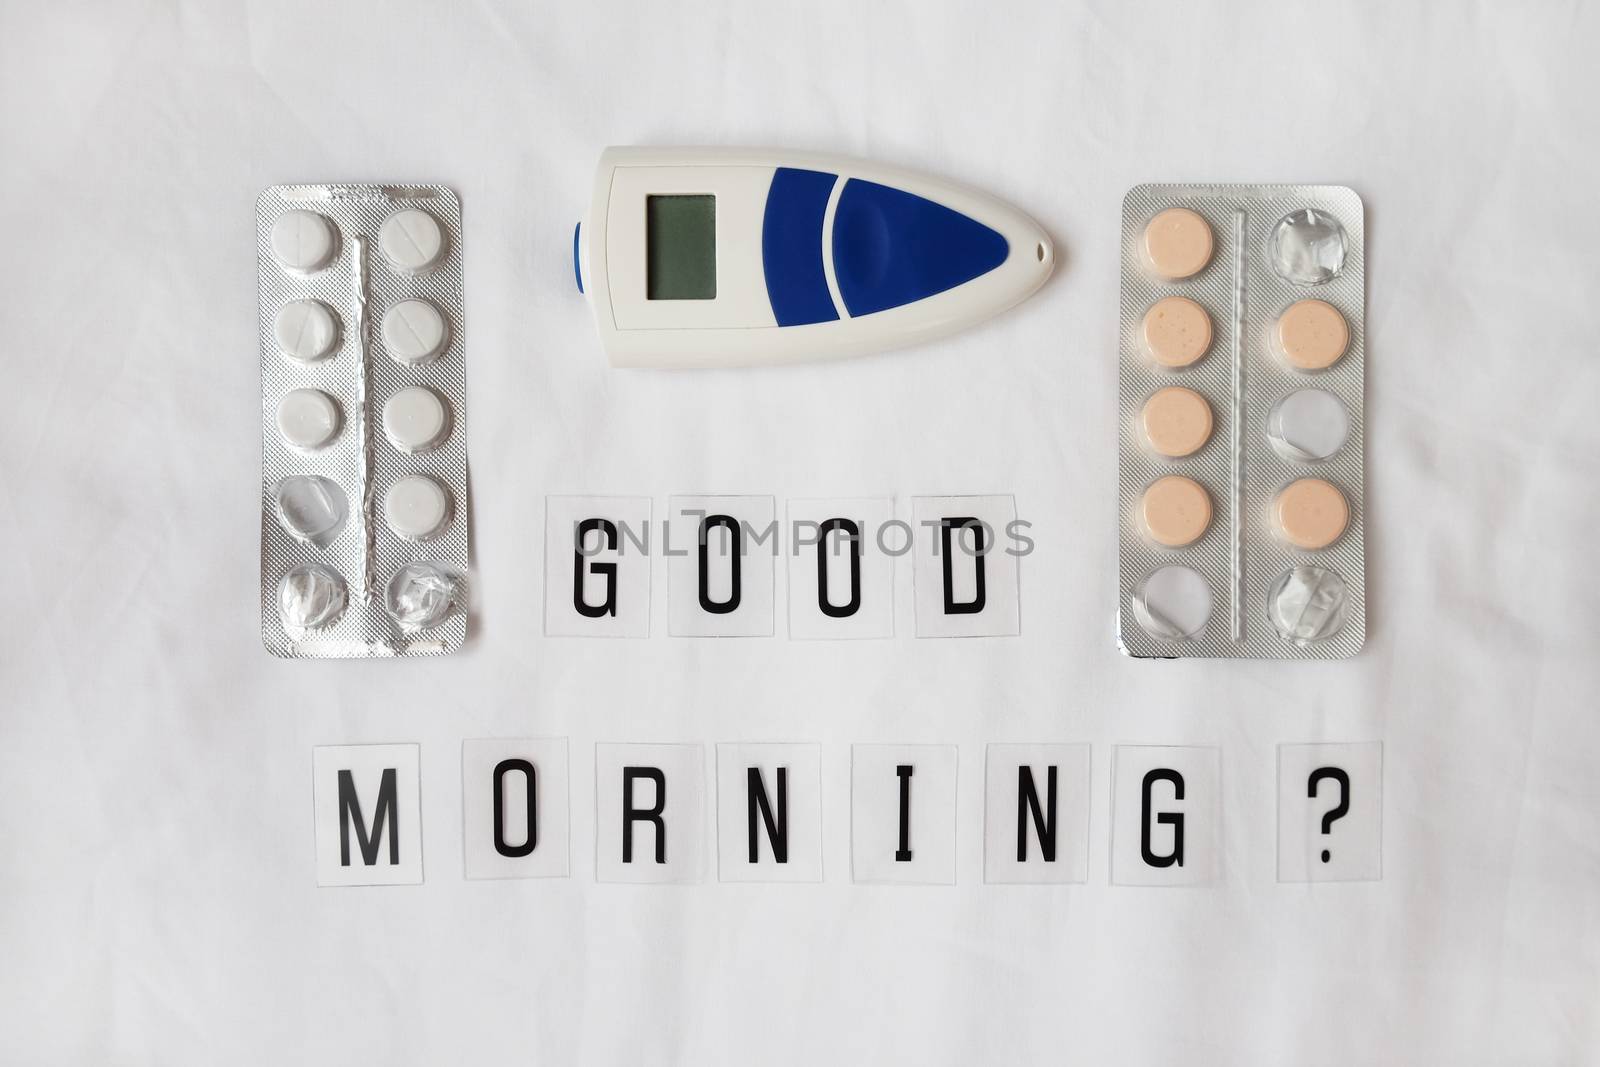 Inscription question Good morning, pills, thermometer on crumpled white sheet. Awakening concept with headache, fever, medicine, illness, health, hangover, migraine. Horizontal, flat lay by ALLUNEED